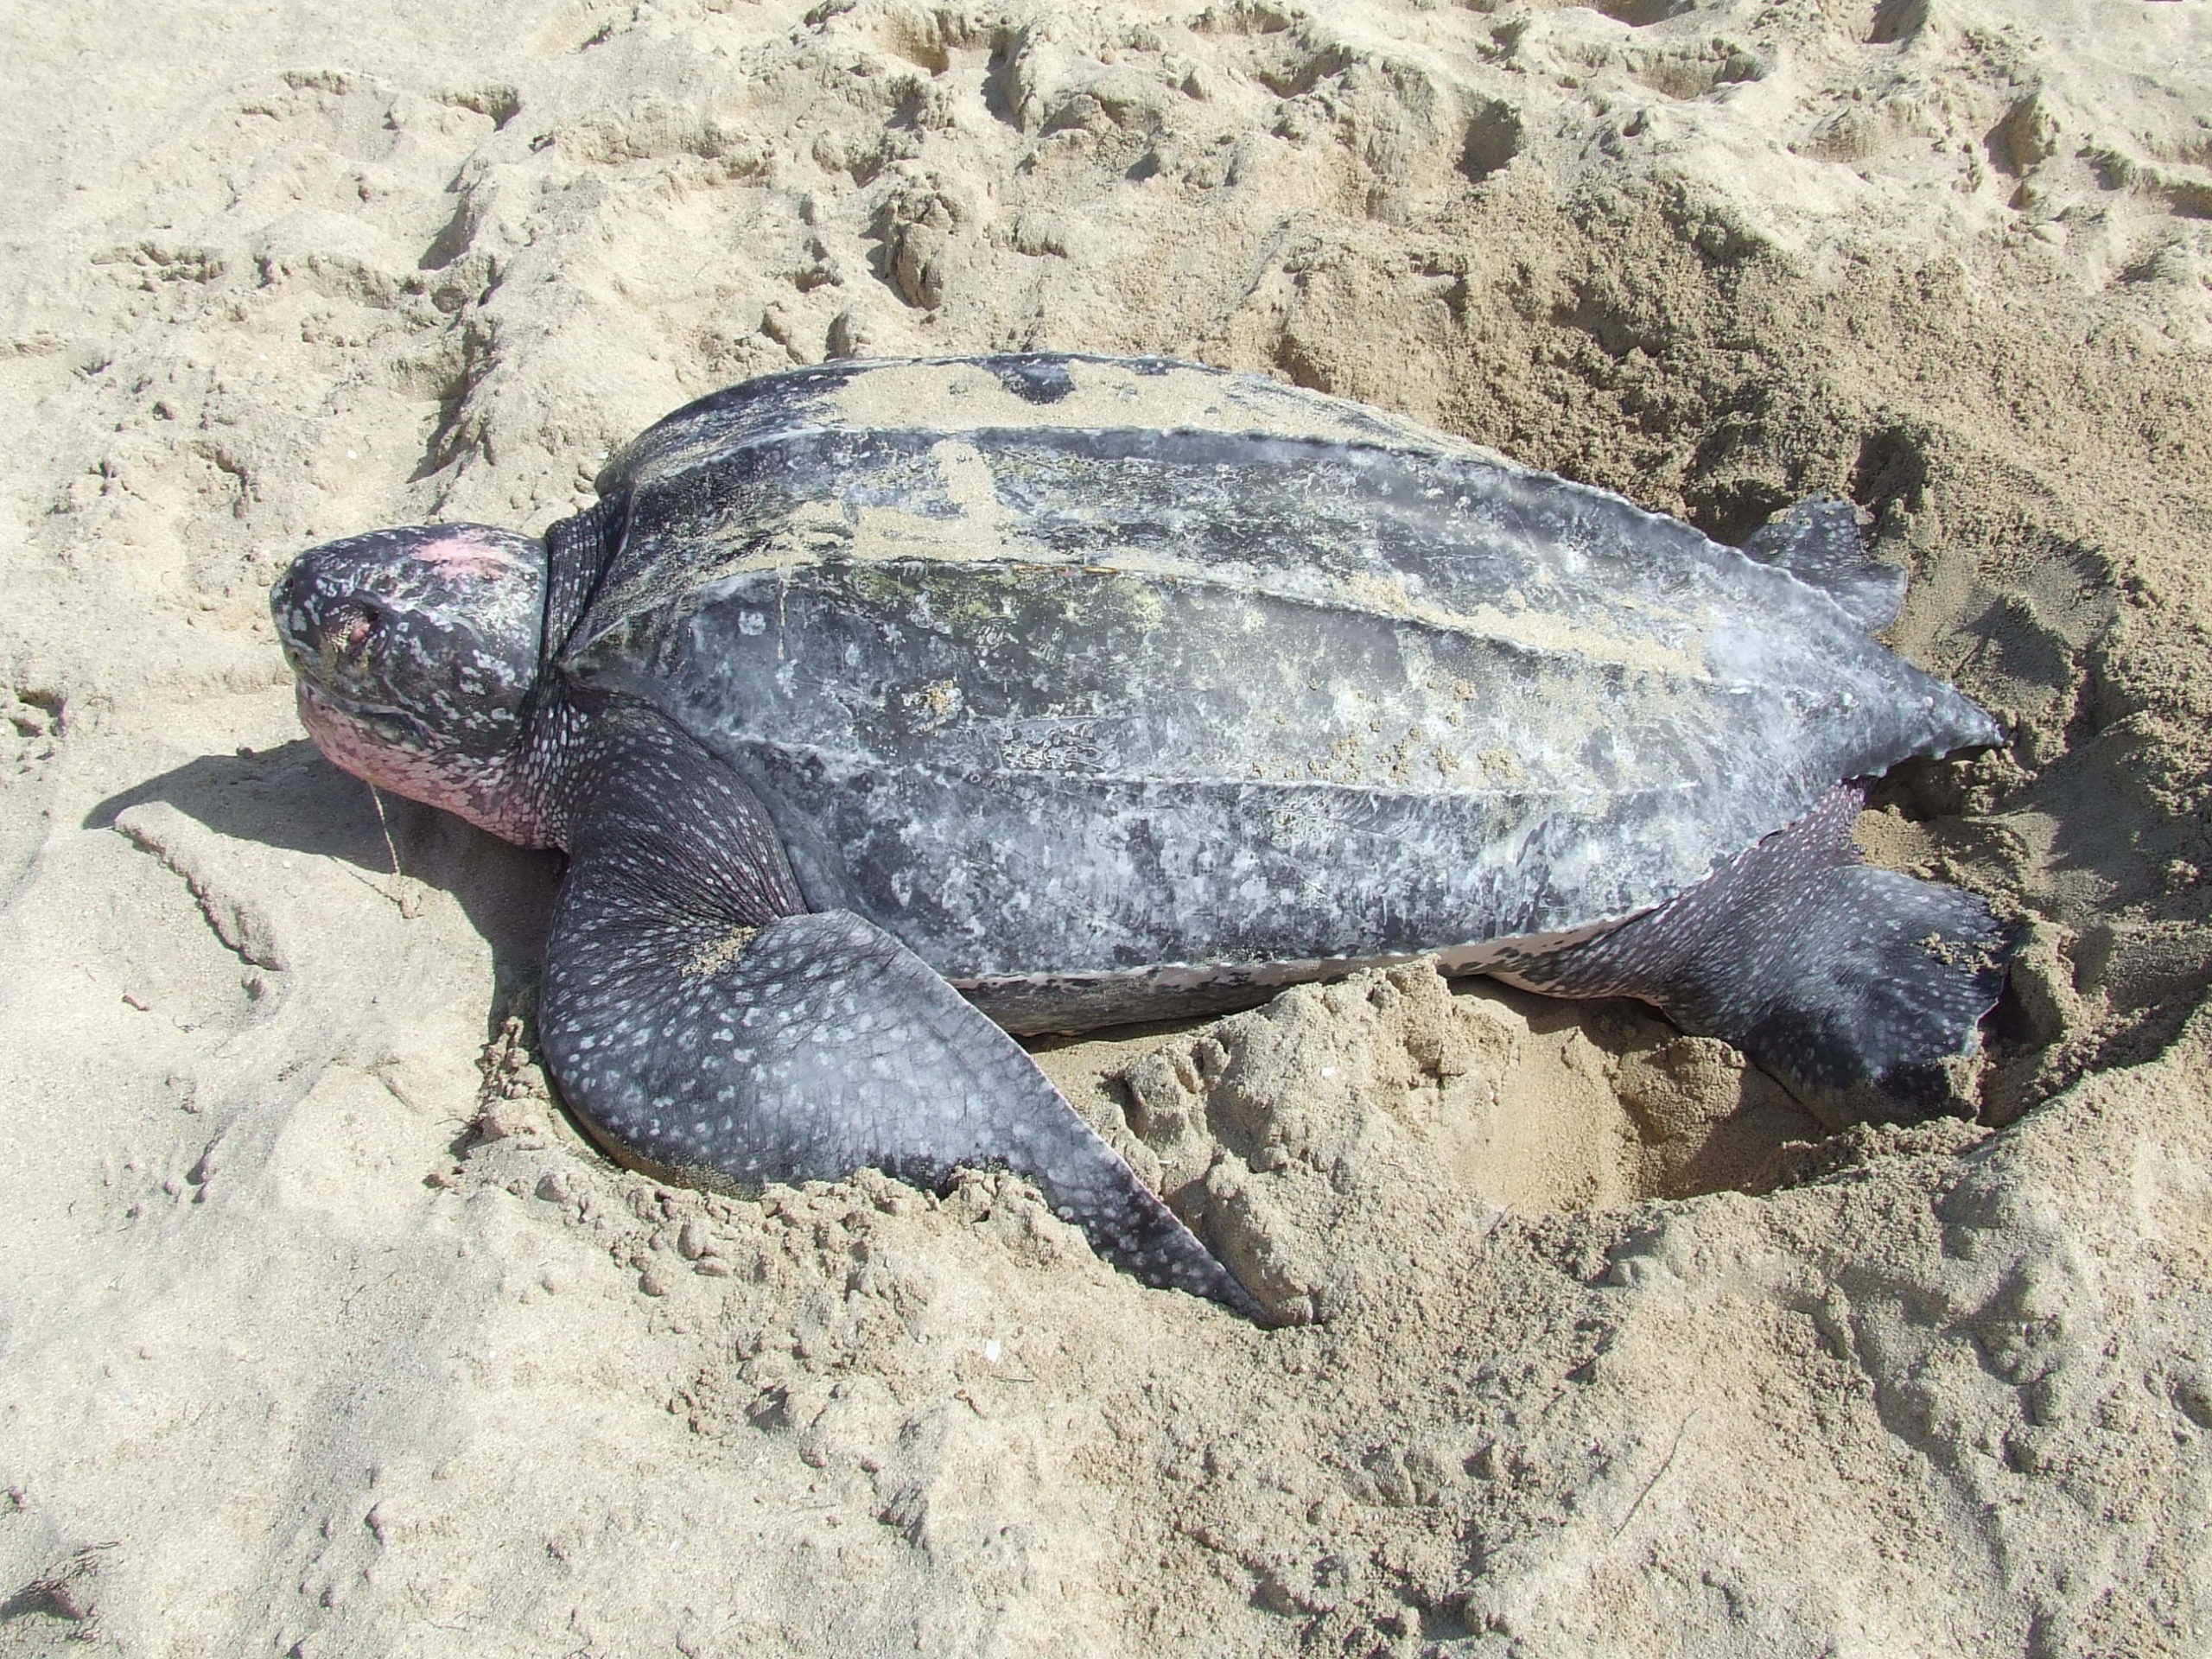 Leatherback sea turtle digging a body pit. PC: U.S. Fish and Wildlife Service Southeast Region